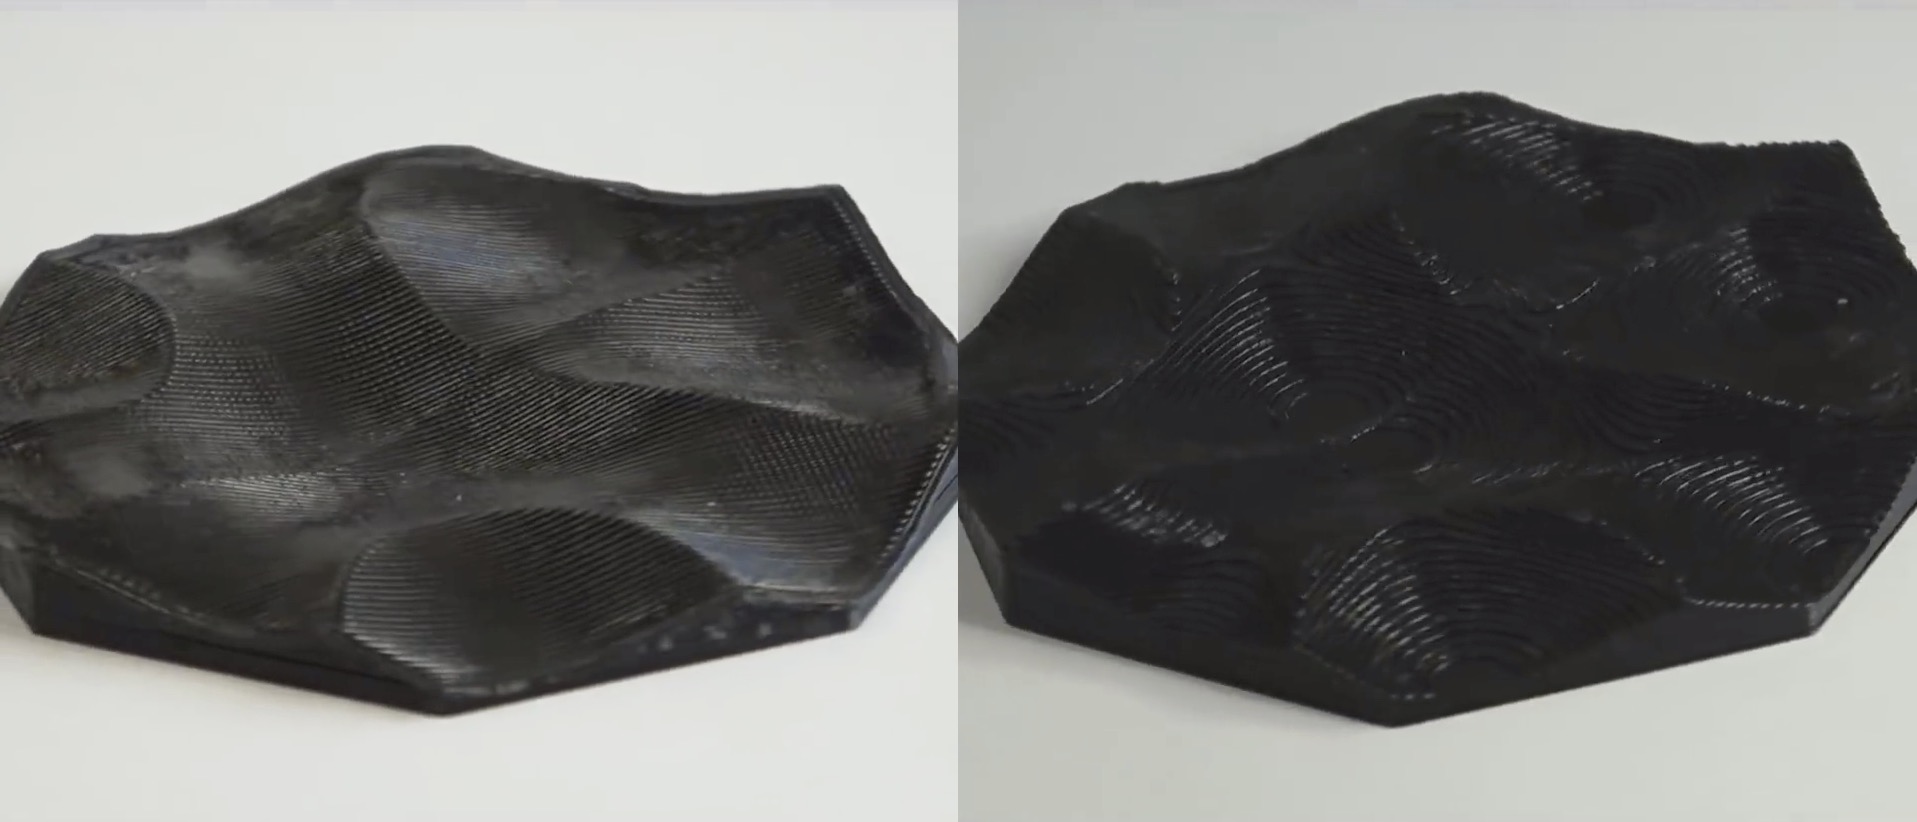 Nonplanar 3D Printing Gives Curvy Top Layers